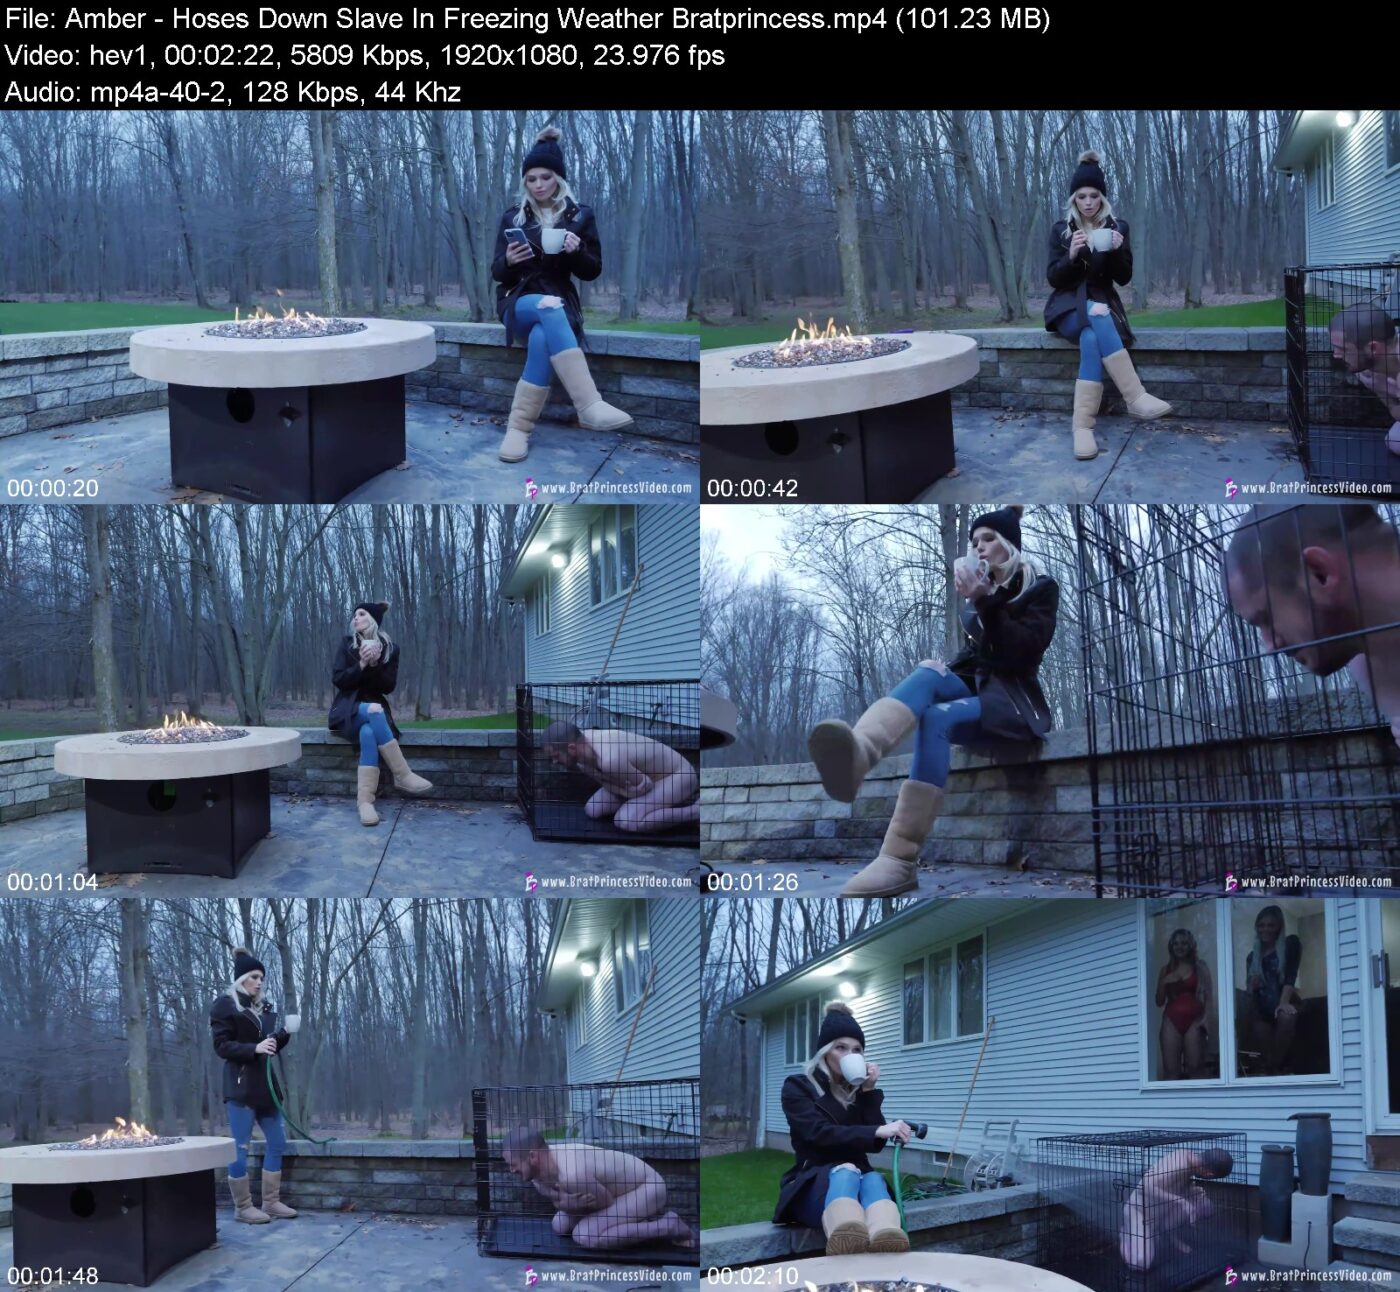 Amber - Hoses Down Slave In Freezing Weather Bratprincess